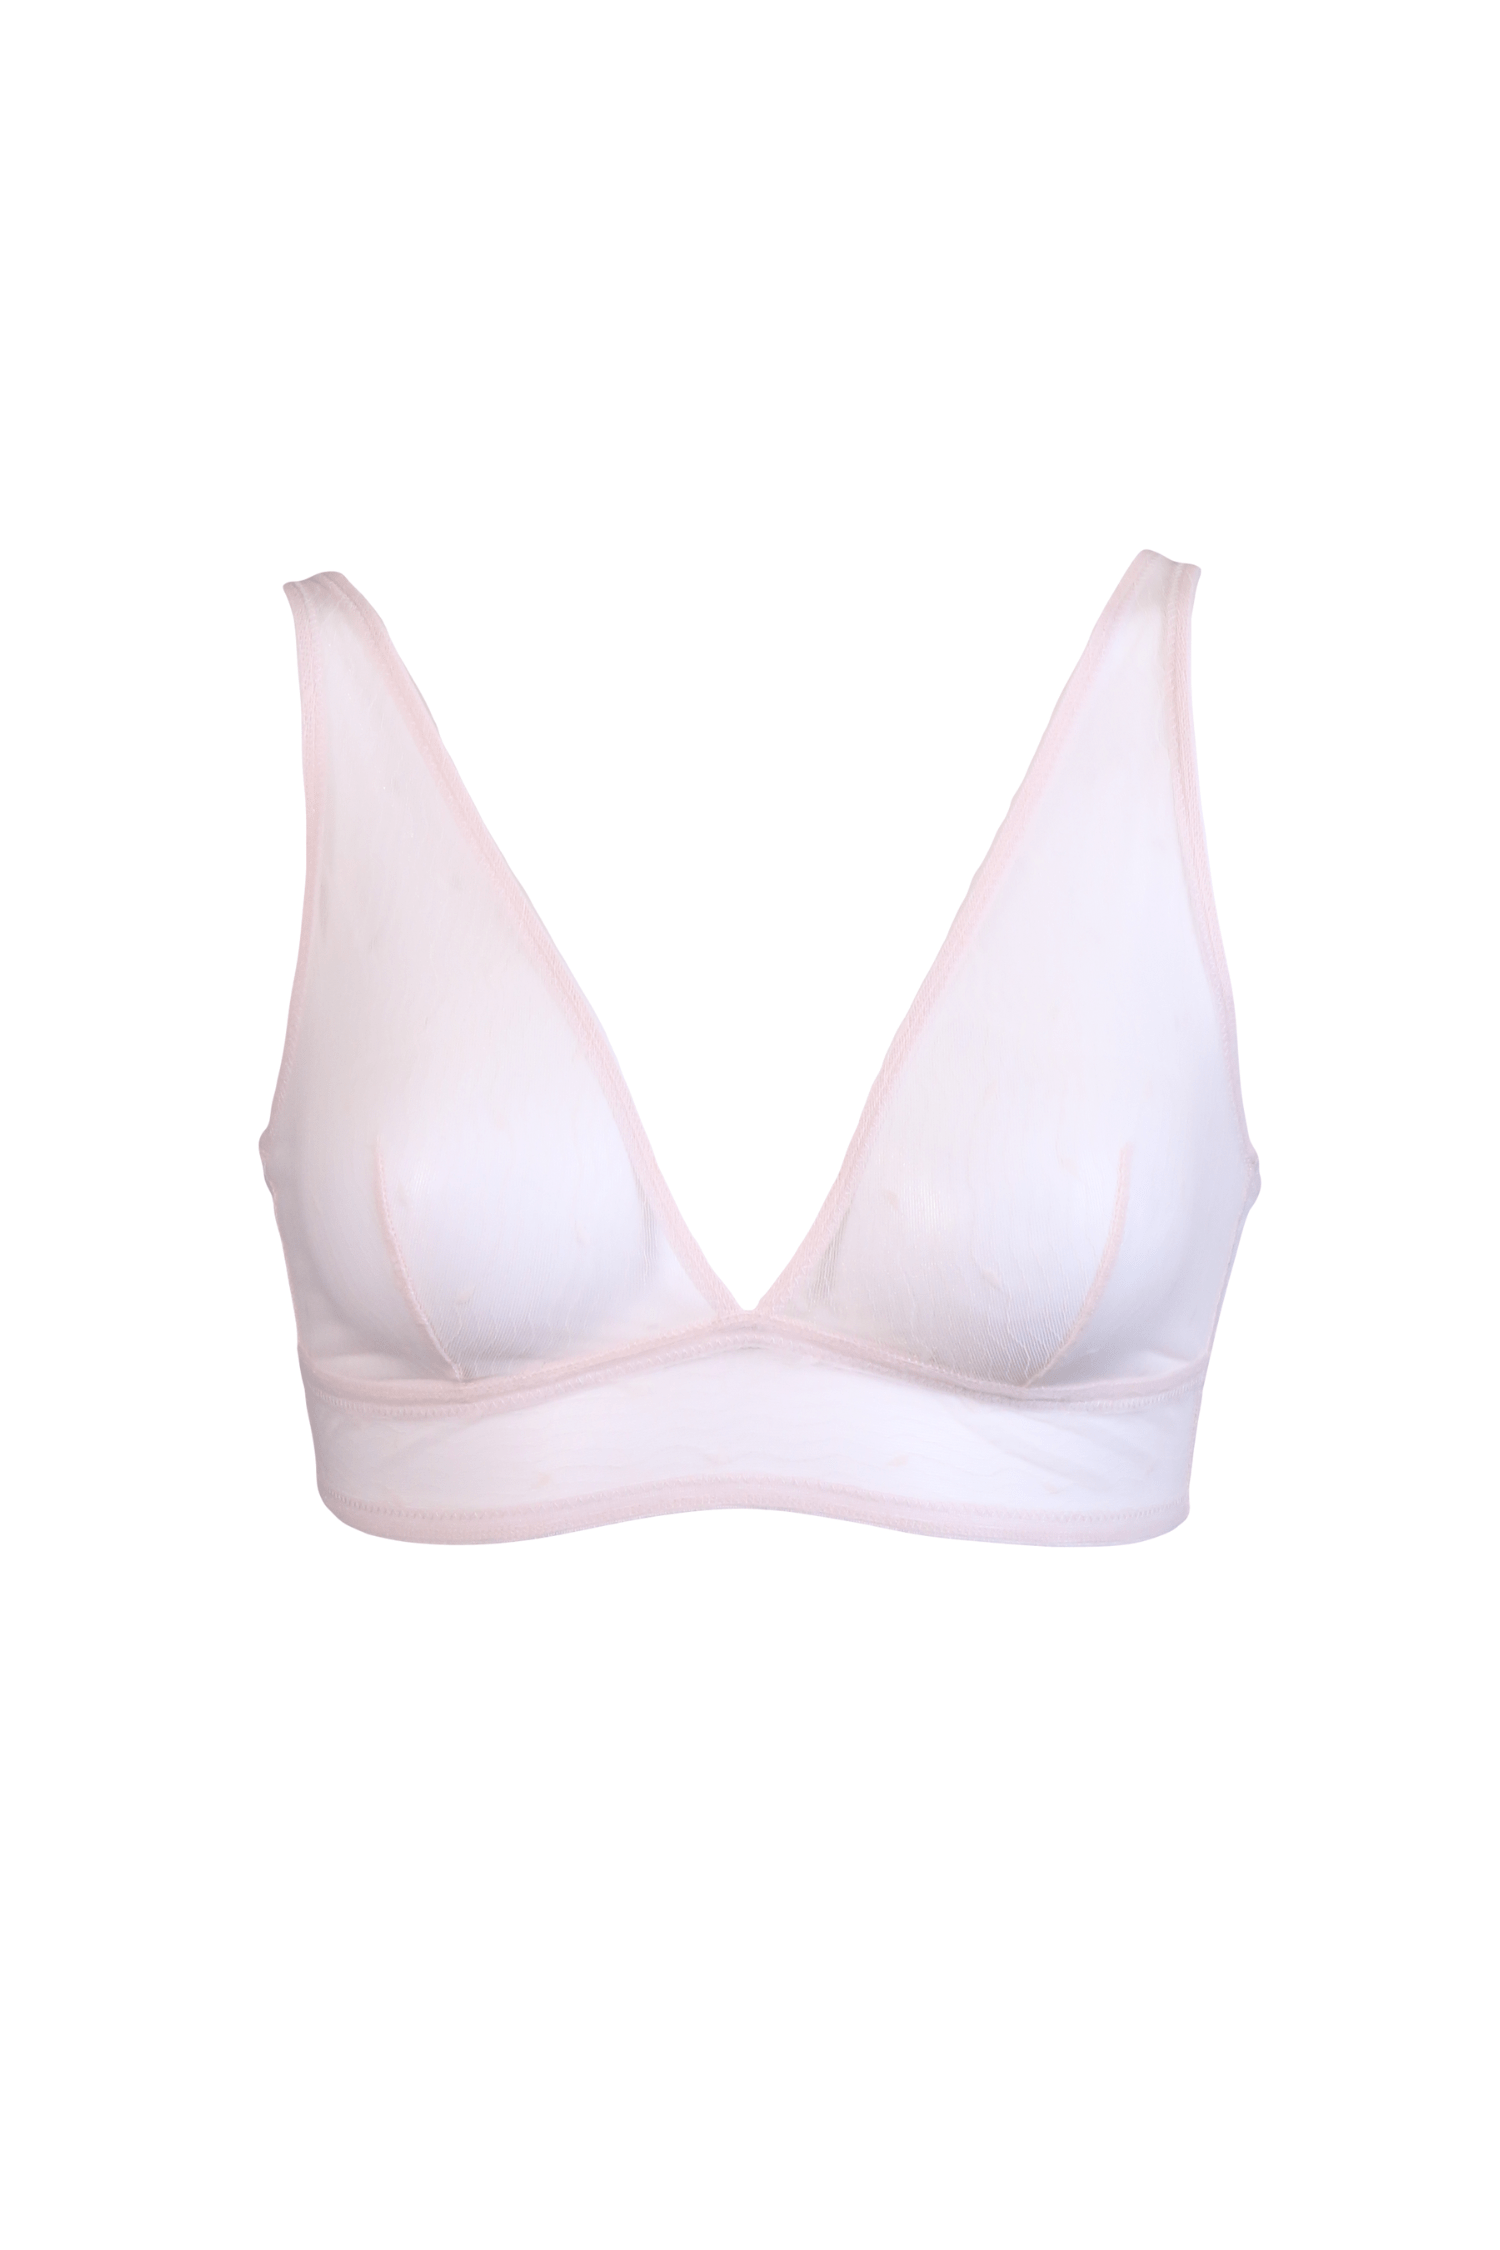 e Full Cup Bra - Olive - Chérie Amour